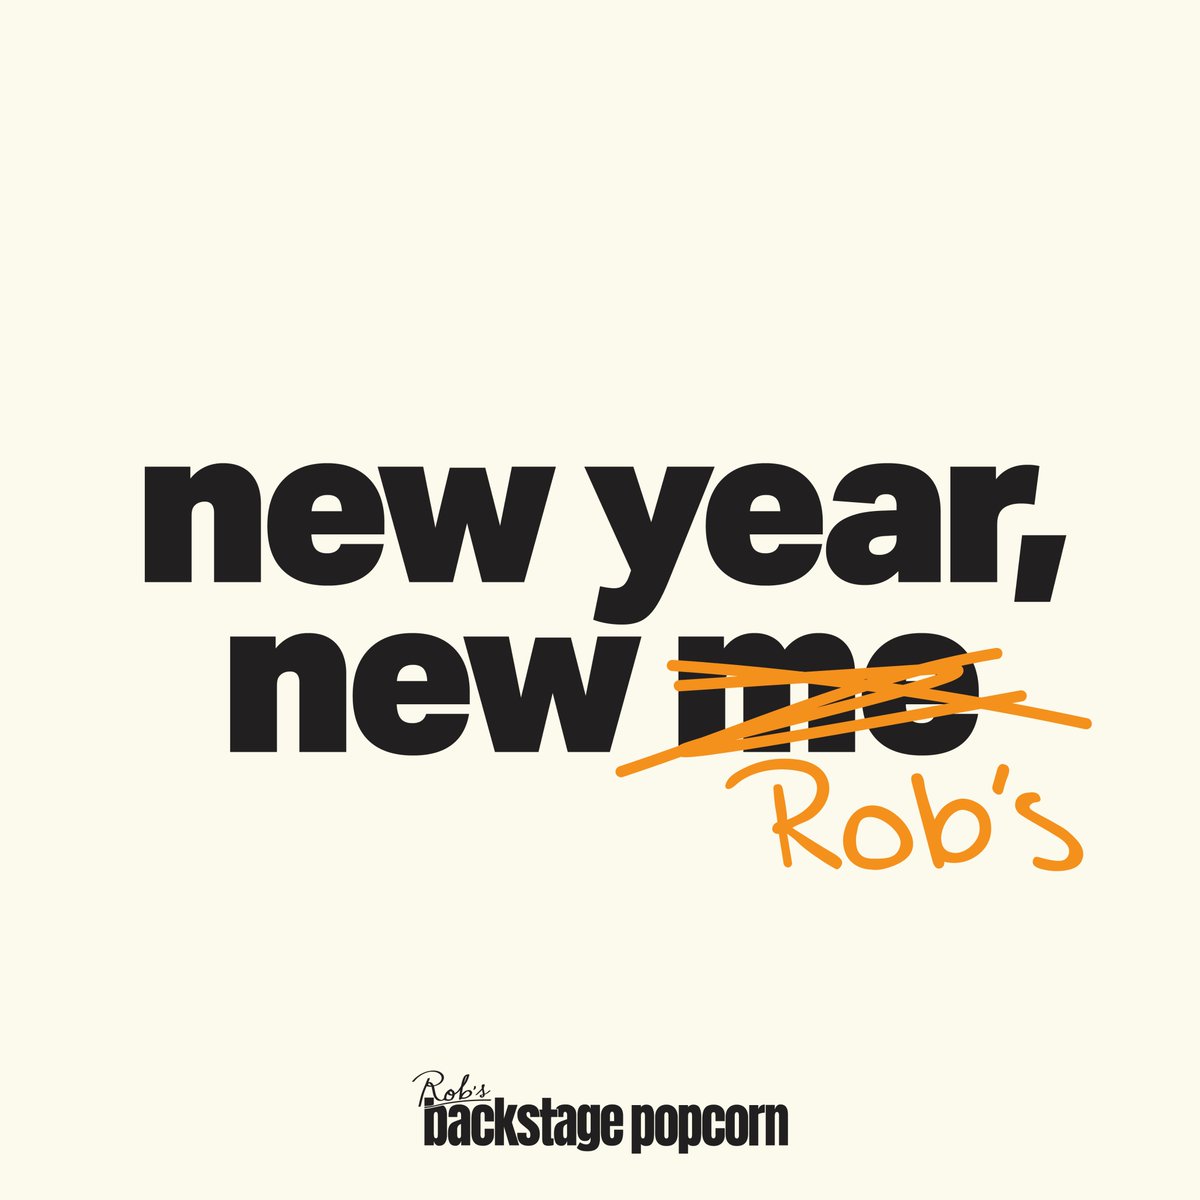 To celebrate our new look and bolder flavor, FIVE contestants will each win a customized Rob’s bag with their face on it! Head to eatrobs.com/pages/new-year…… for details on how to enter! *Participation is subject to rules/regulations outlined on eatrobs.com/pages/new-year…….